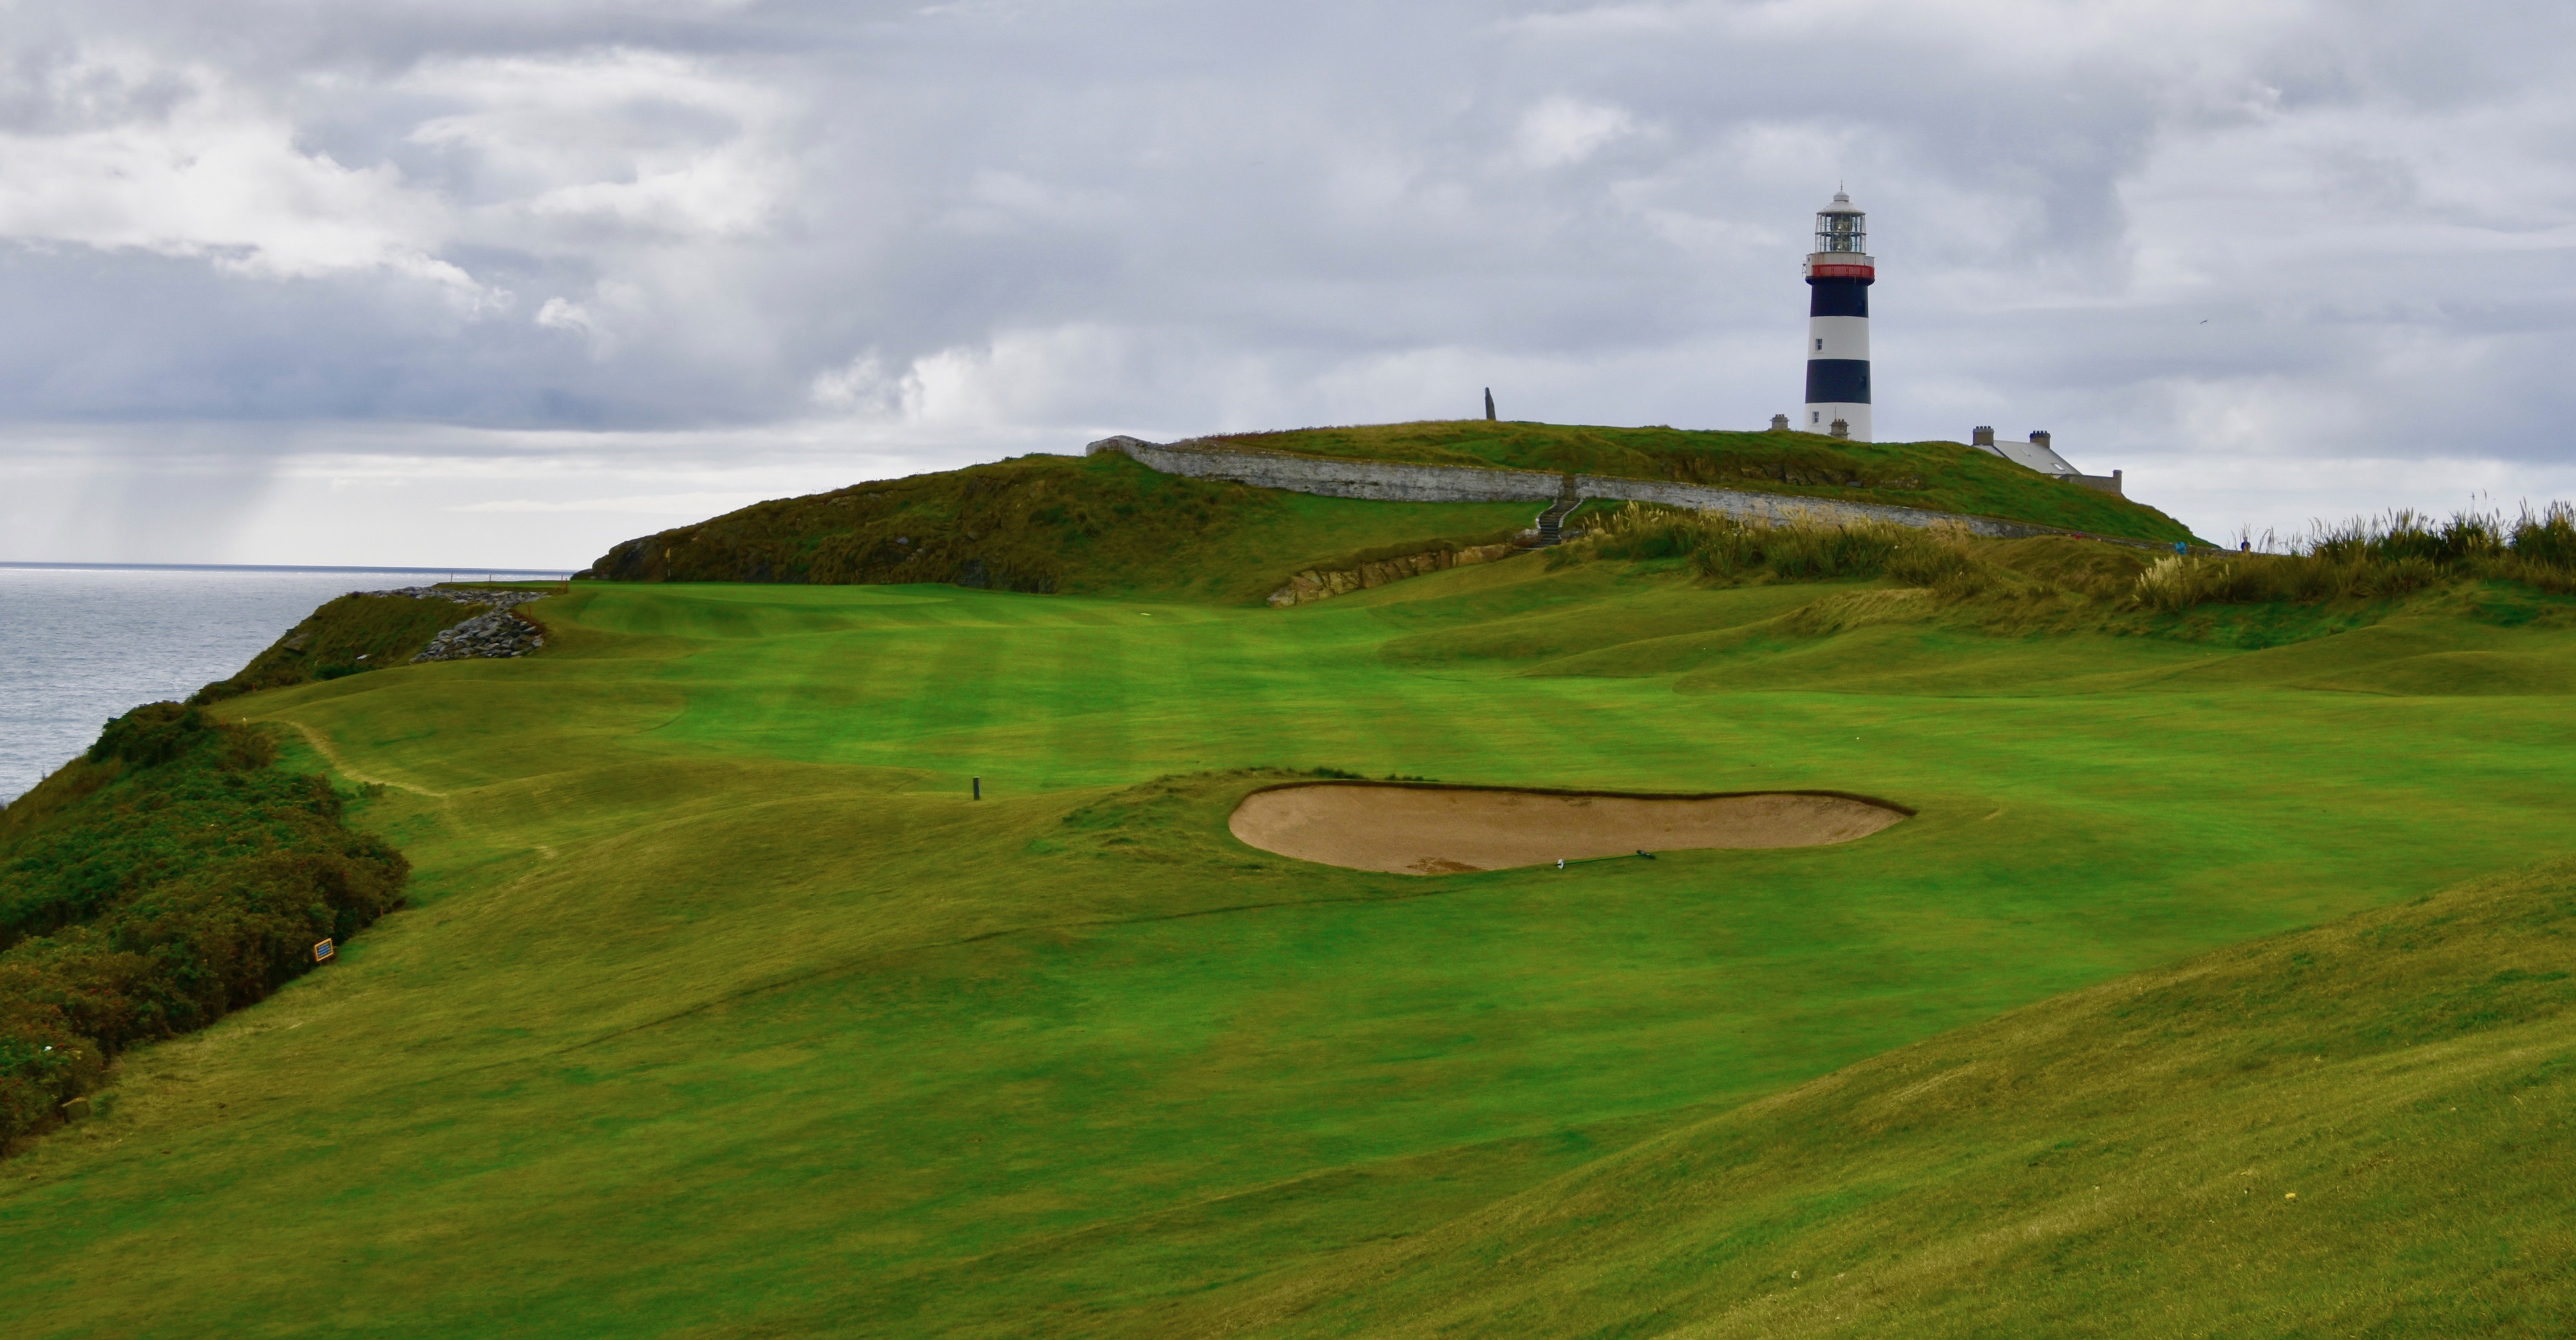 No. 4 Approach, Old Head